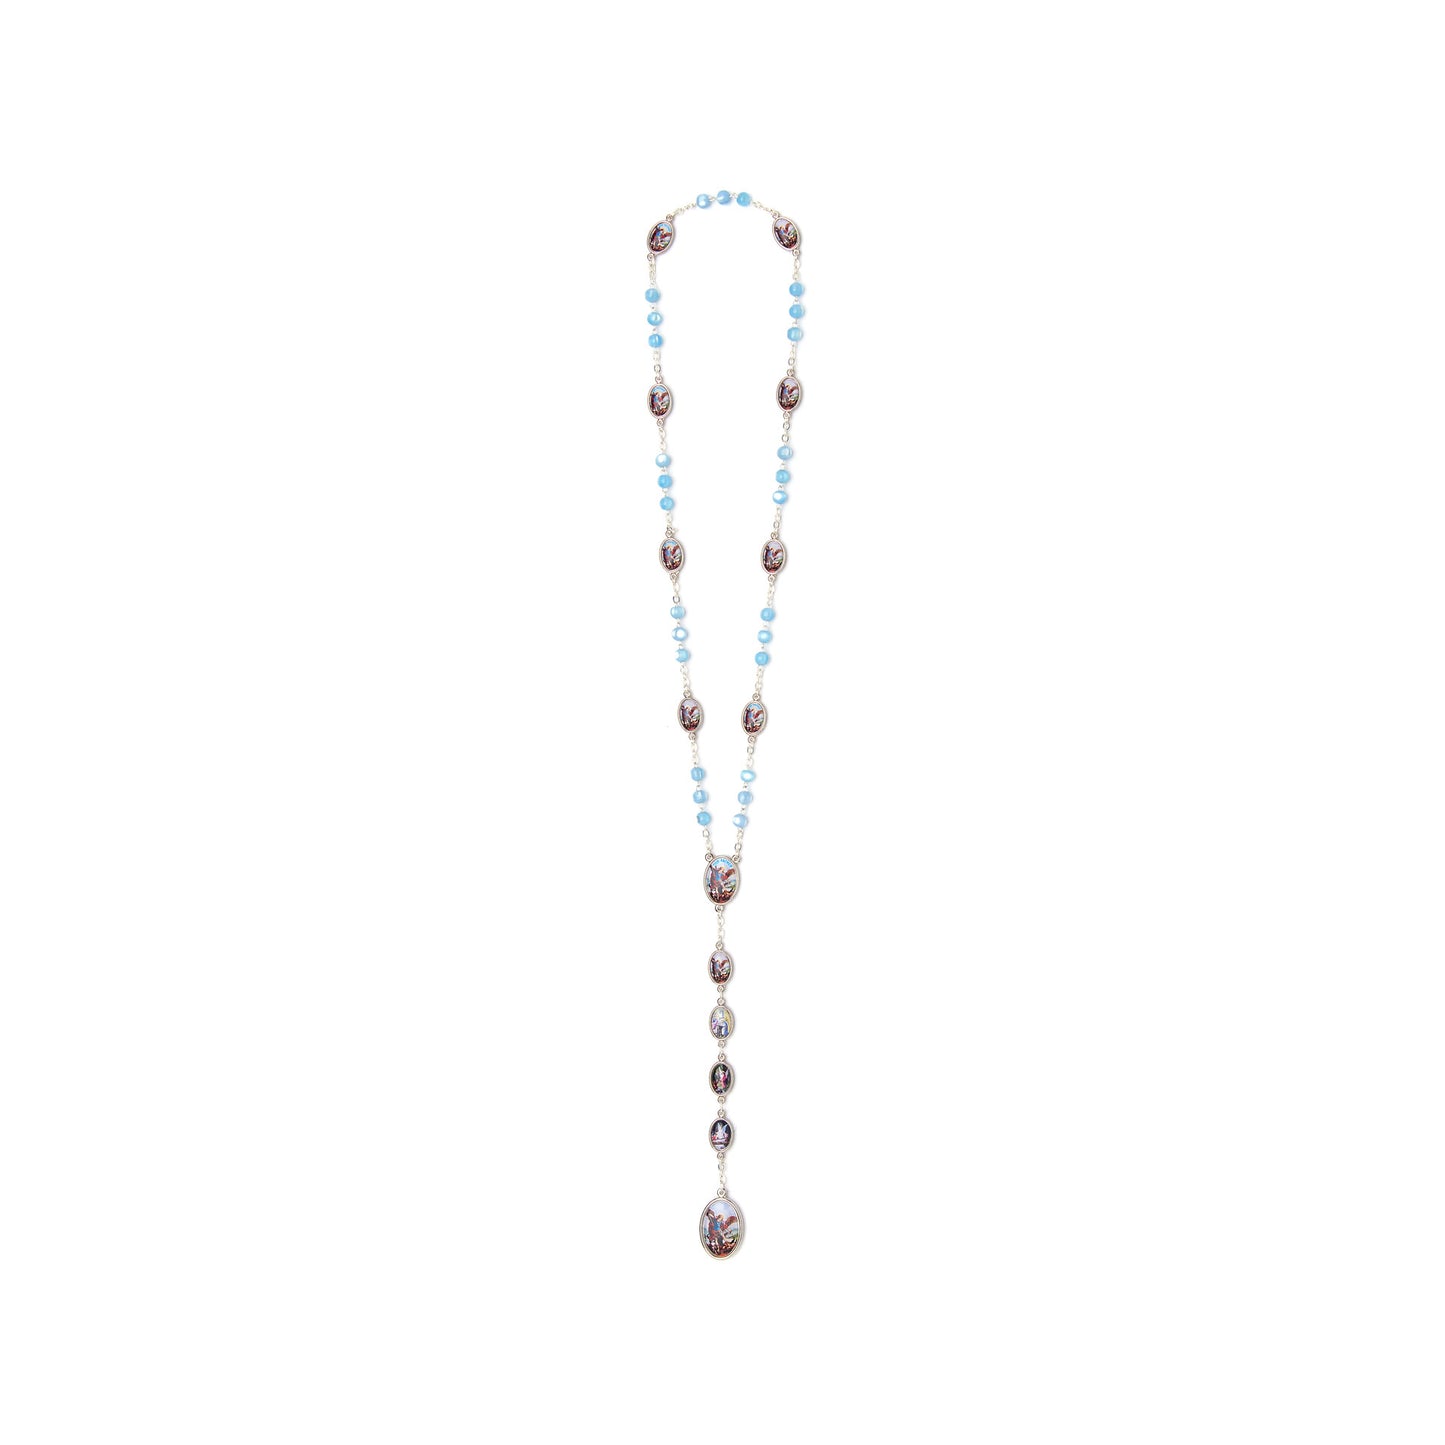 Rosary of Saint Michael the Archangel with Imitation Mother of Pearl Beads